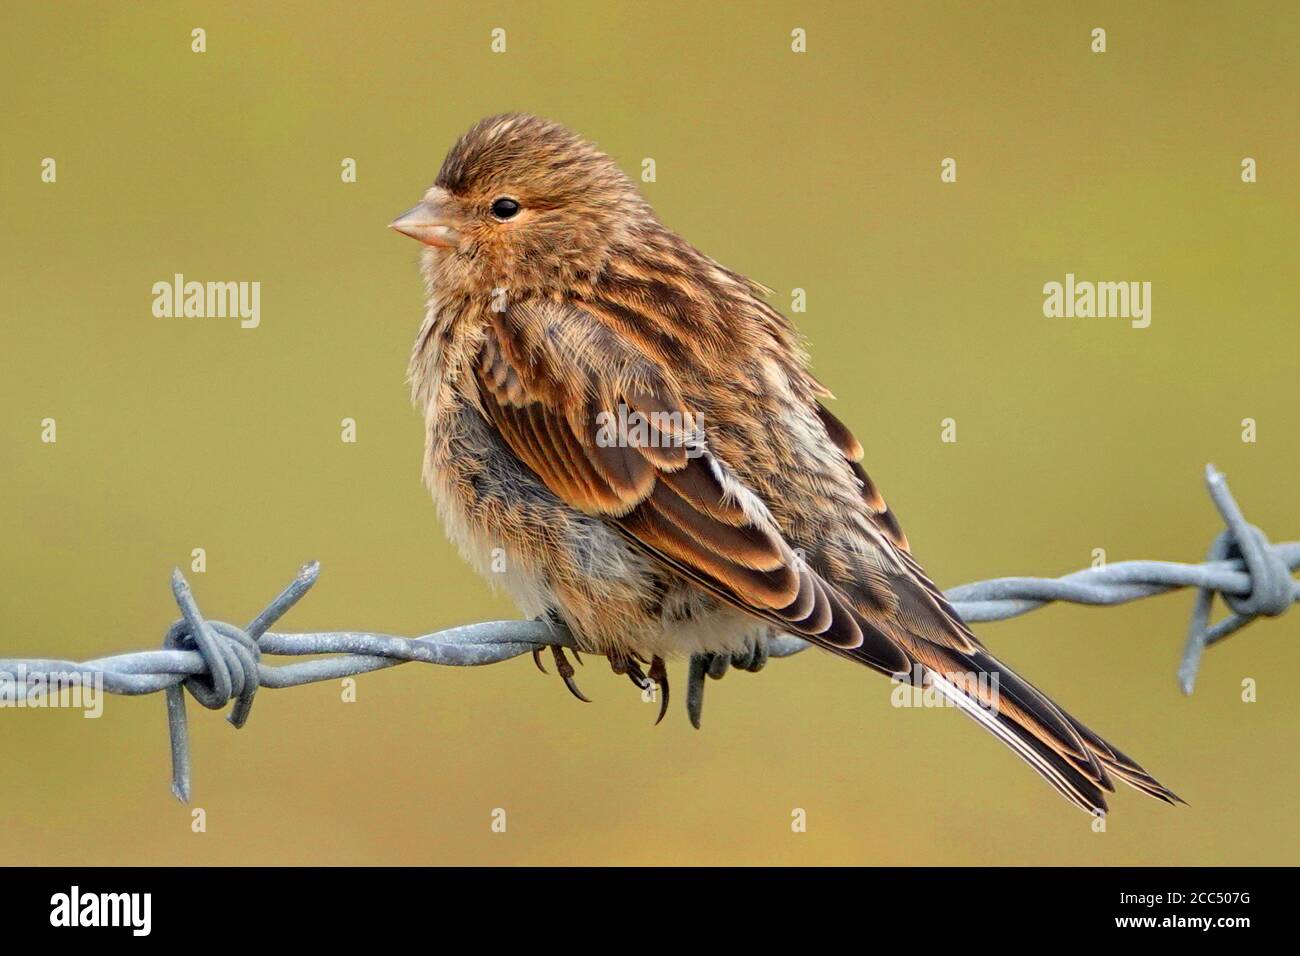 British twite (Carduelis flavirostris pipilans, Carduelis pipilans), perched on barbed wire, United Kingdom, England, Norfolk Stock Photo